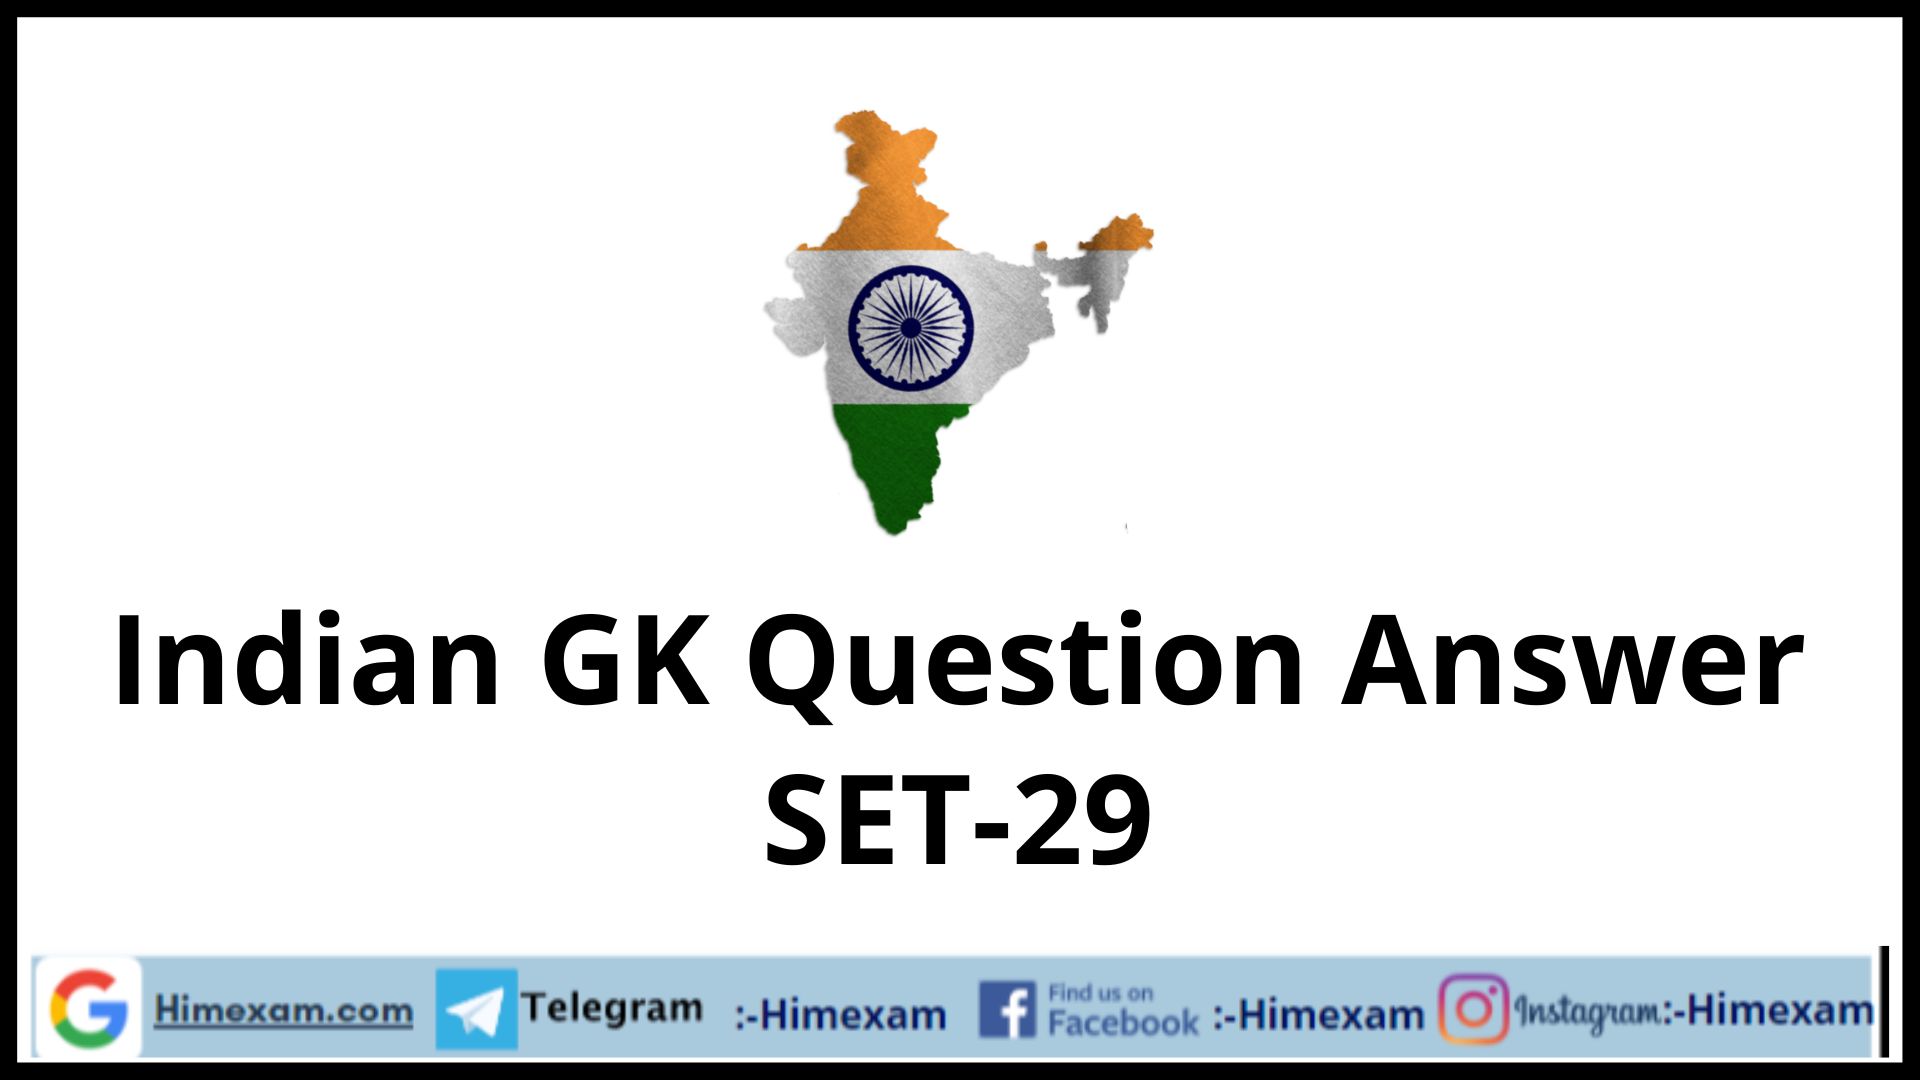 Indian GK Question Answer SET-29